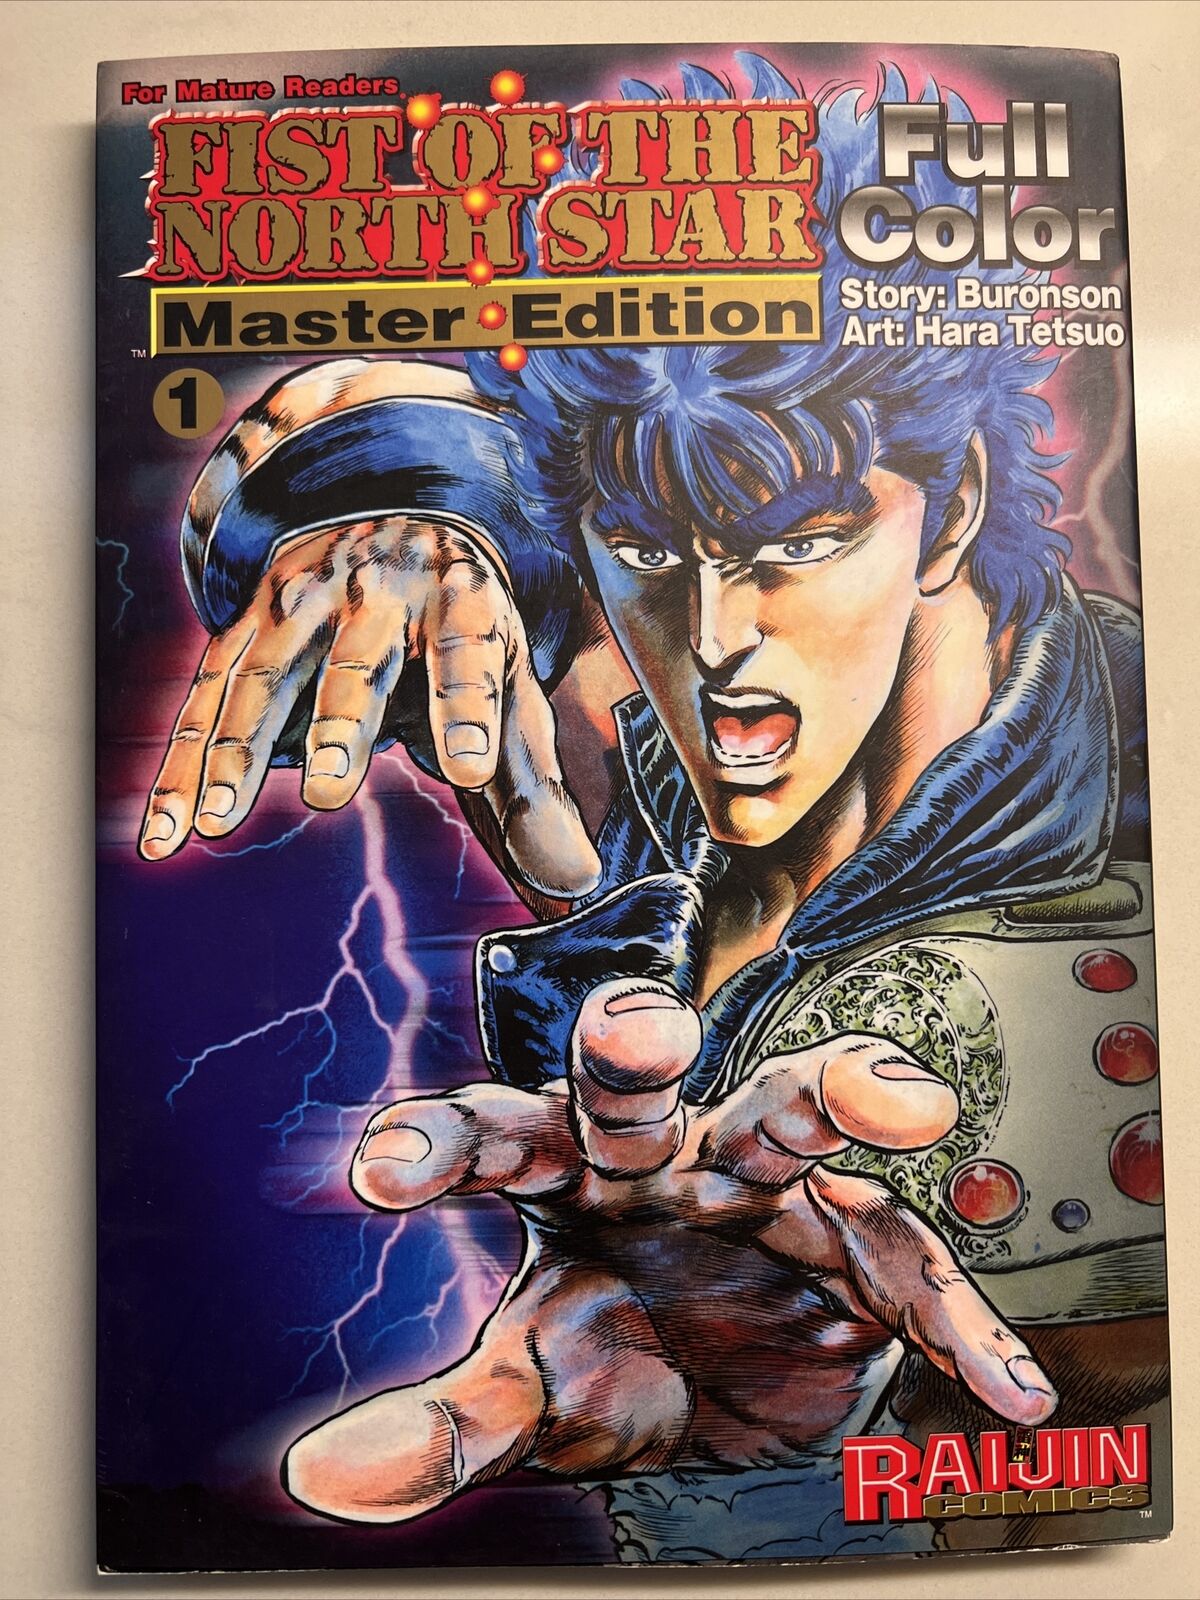 FIST OF THE NORTH STAR MASTER EDITION VOL 1 Full Color Buronson Hara Testuo